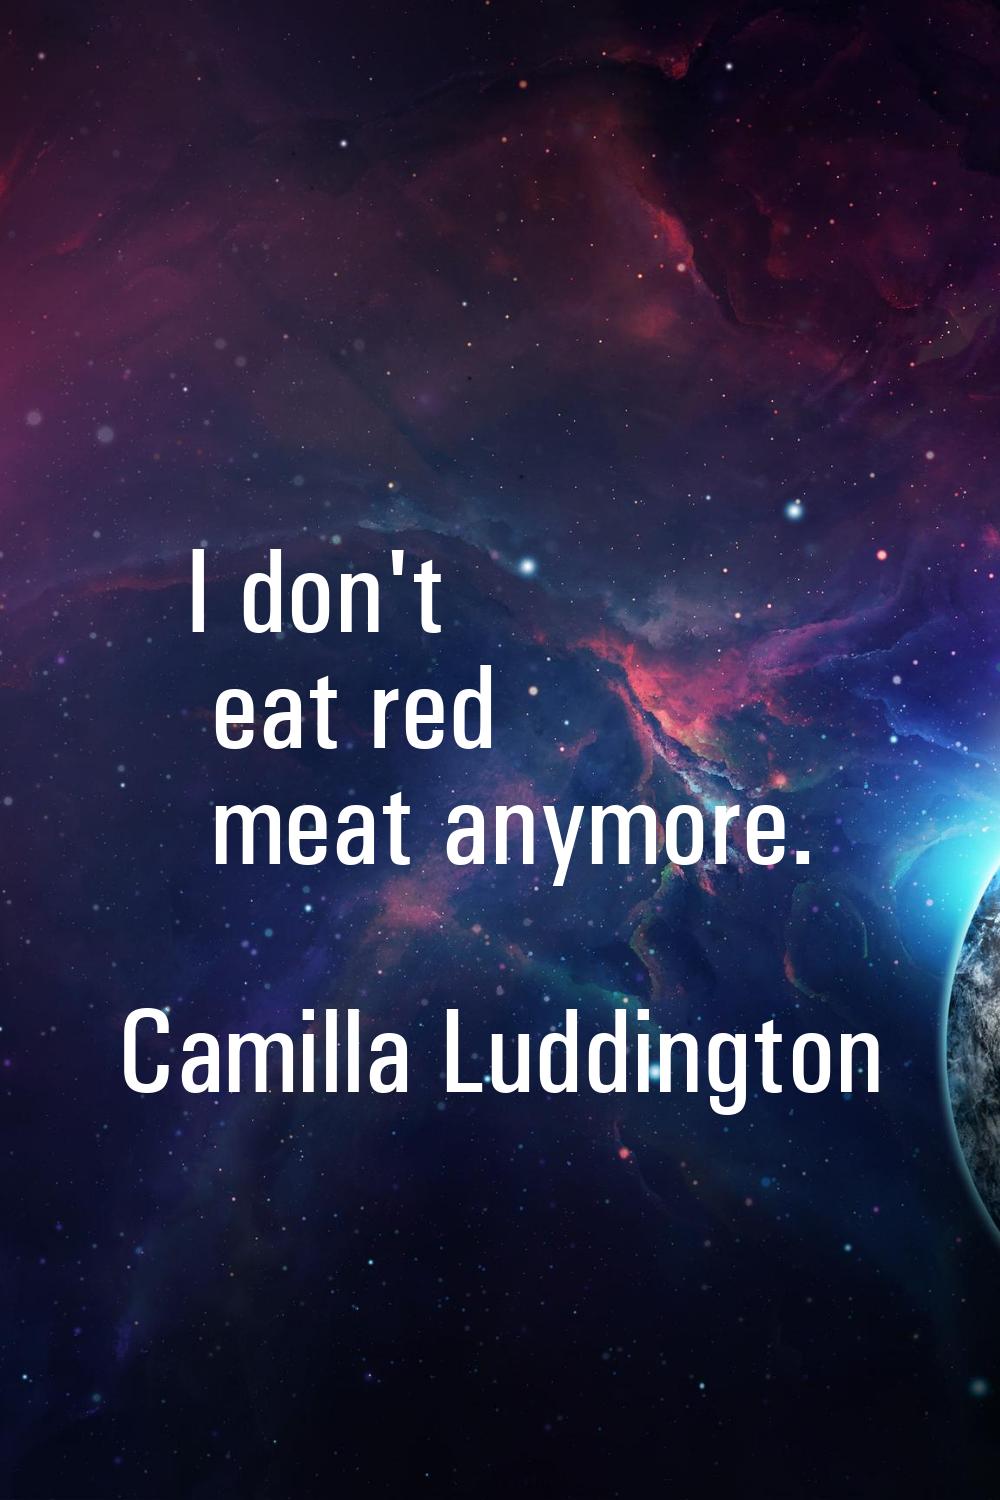 I don't eat red meat anymore.